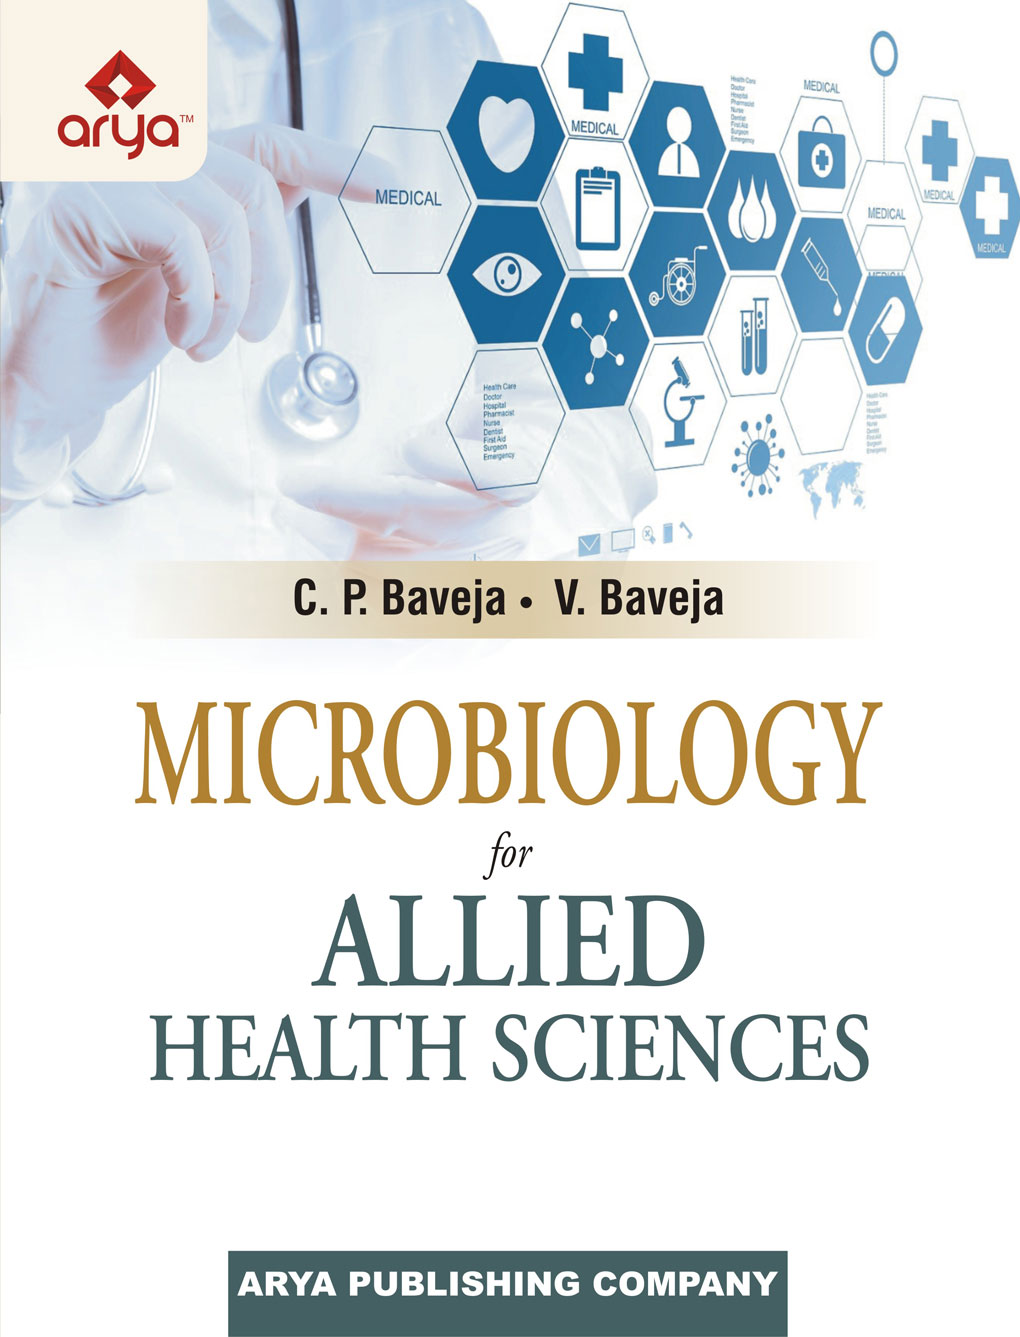 Microbiology for Allied Health Sciences